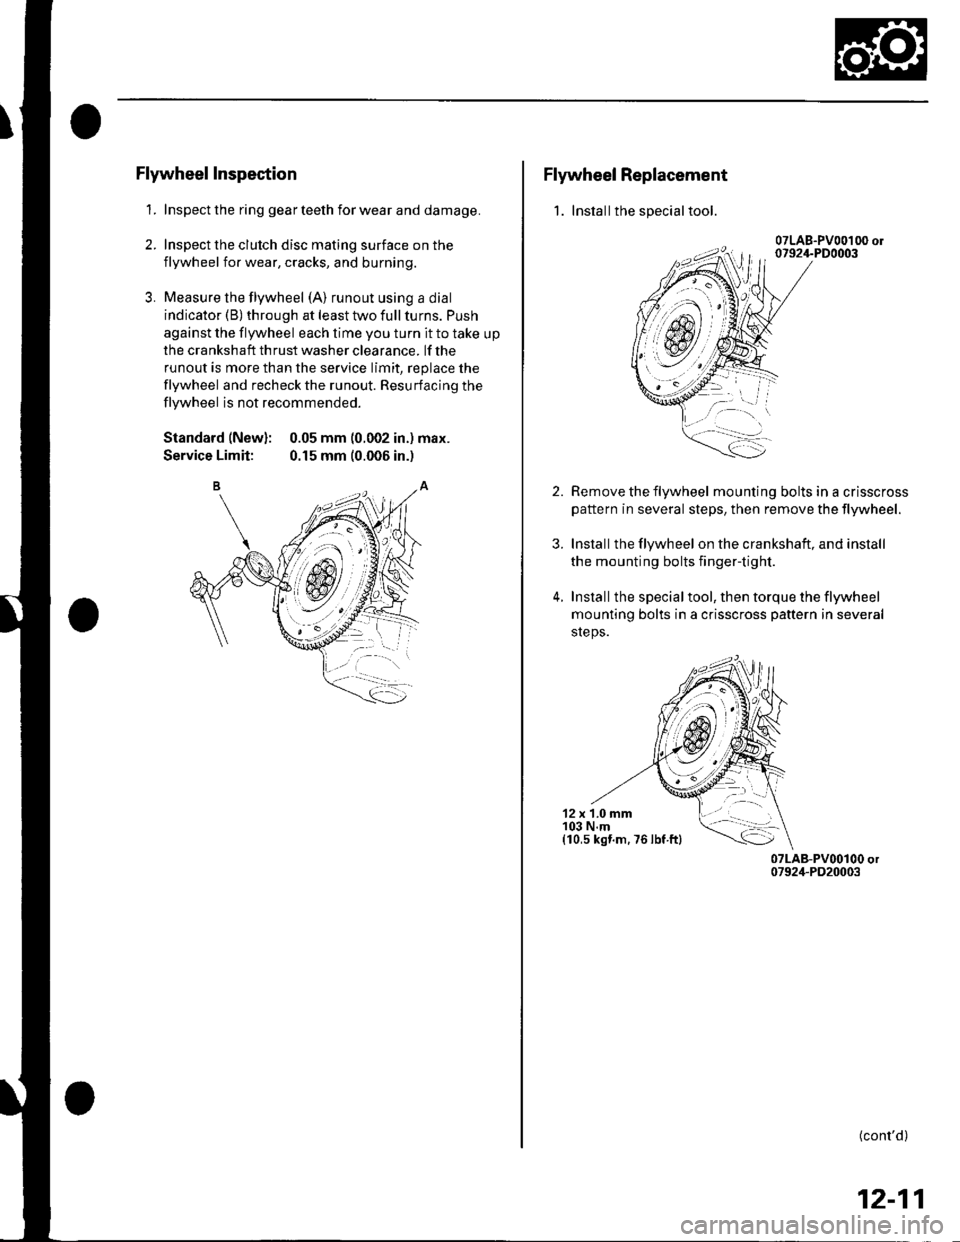 HONDA CIVIC 2002 7.G Workshop Manual Flywheel Inspection
1. Inspect the ring gear teeth for wear and damage.
2. Inspect the clutch disc mating surface on the
flywheel for wear, cracks, and burning.
3. Measure the flywheel (A) runout usin